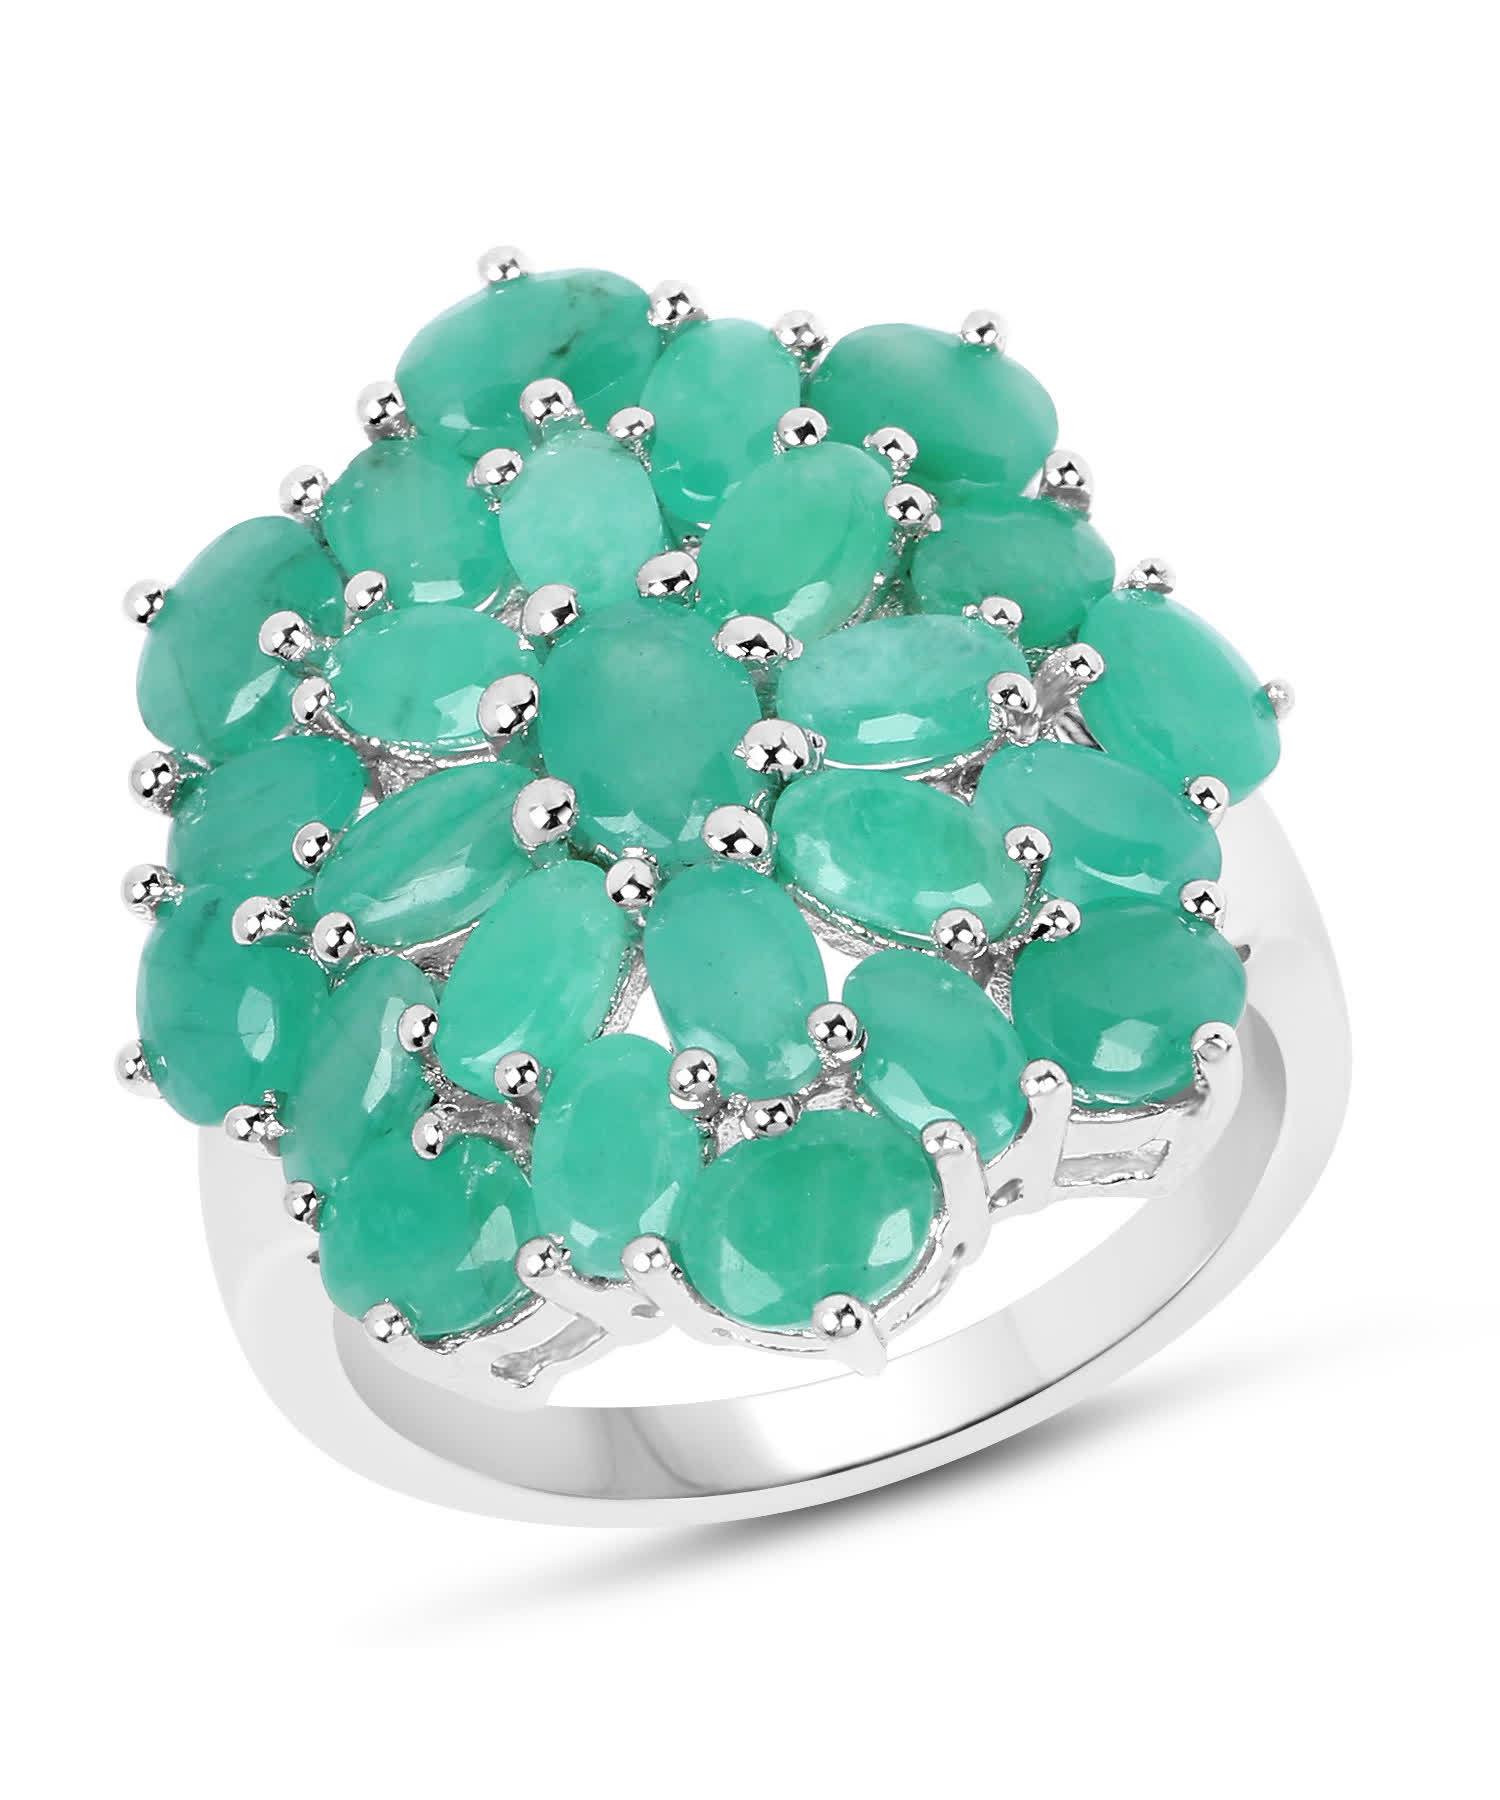 5.70ctw Natural Emerald Rhodium Plated 925 Sterling Silver Cocktail Ring View 1